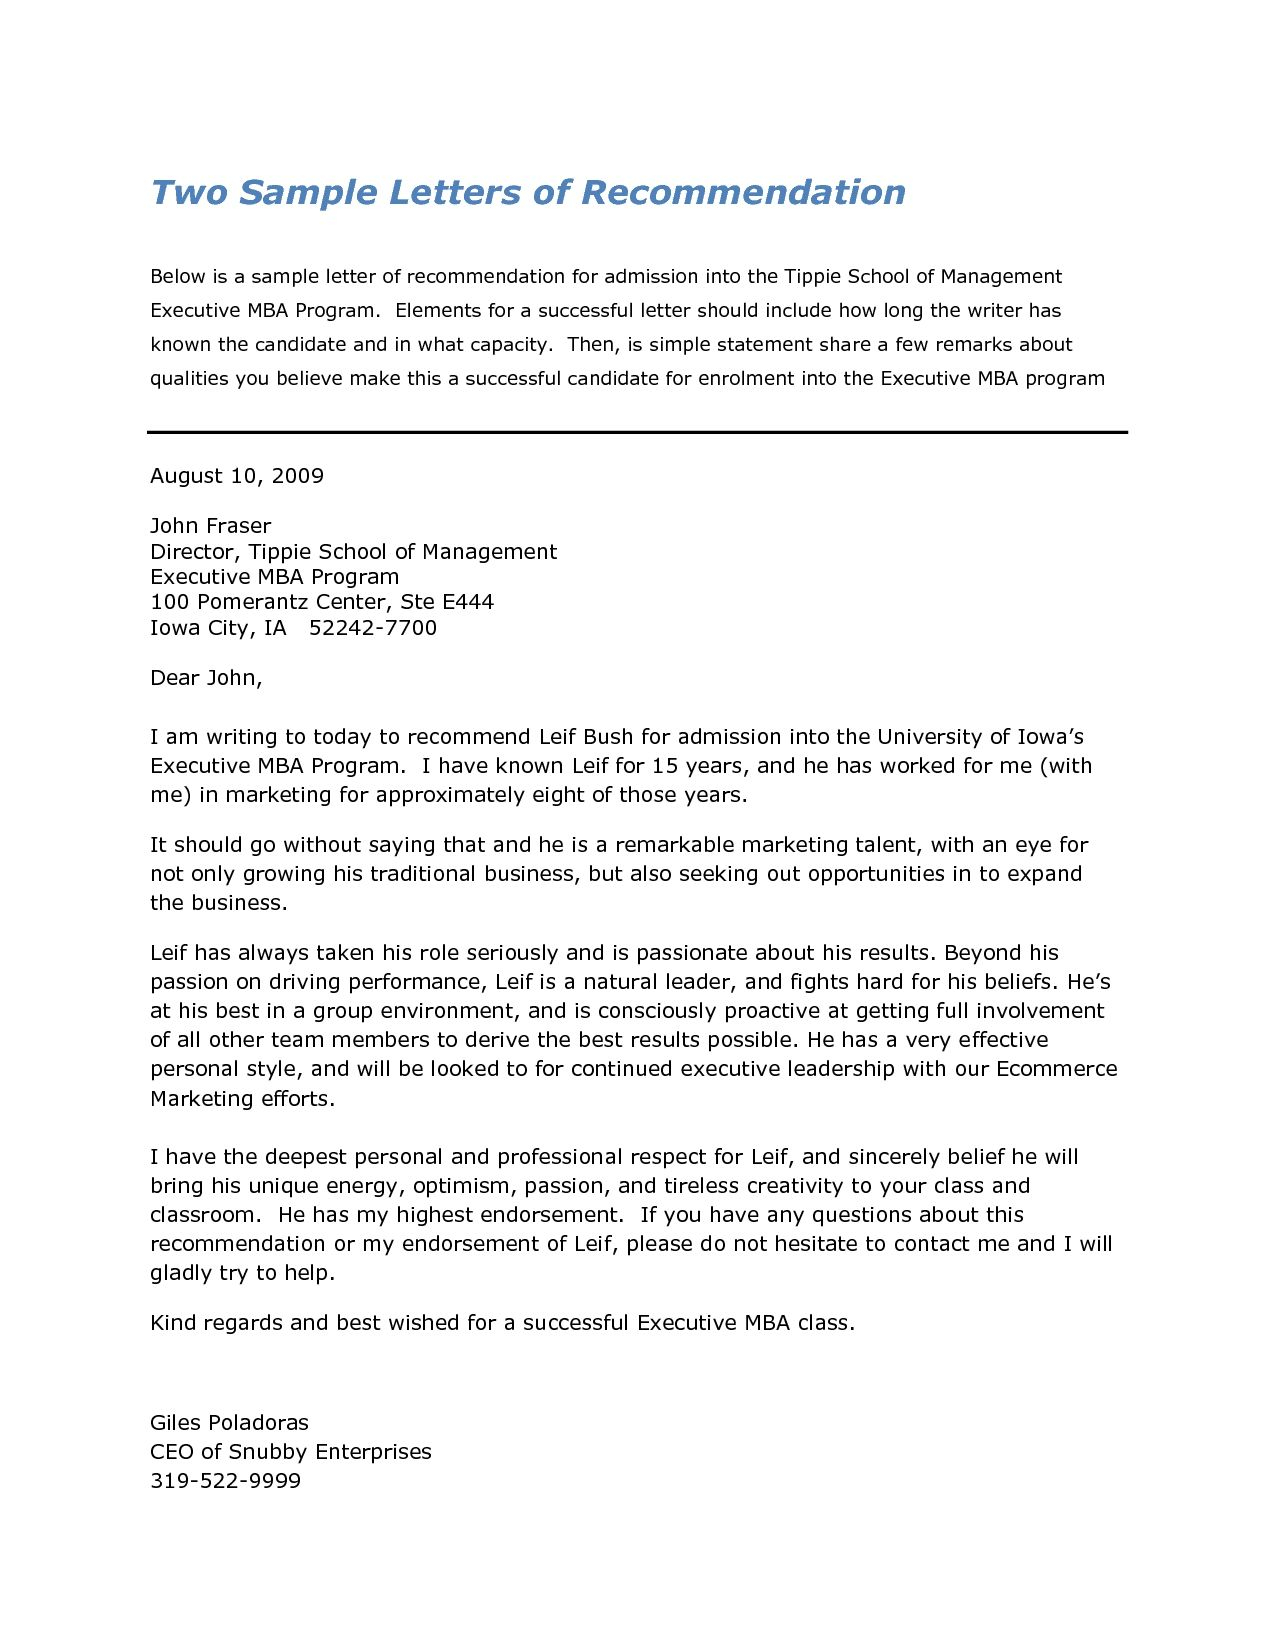 Recommendation Letter For Mba Program Domaregroup in sizing 1275 X 1650